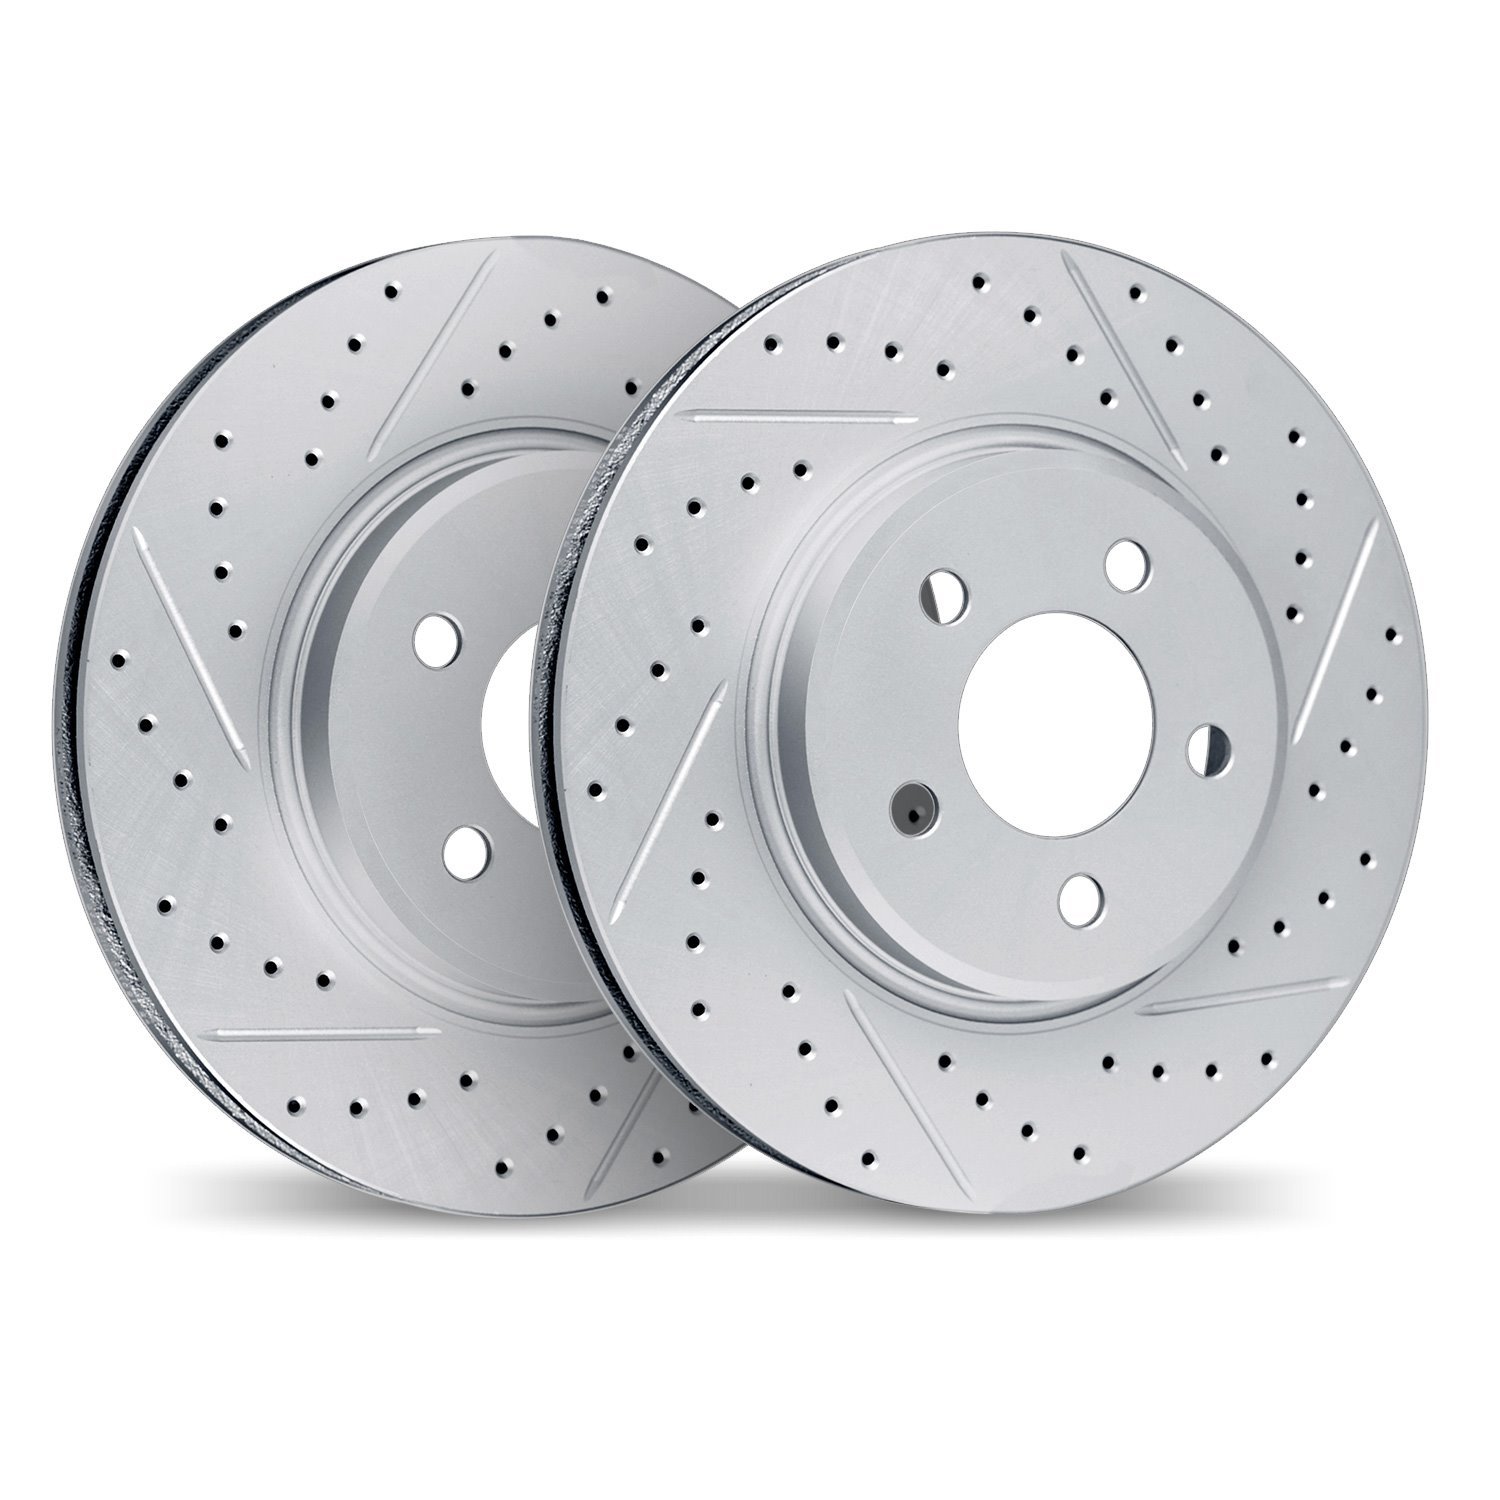 2002-27003 Geoperformance Drilled/Slotted Brake Rotors, 1976-1993 Volvo, Position: Front